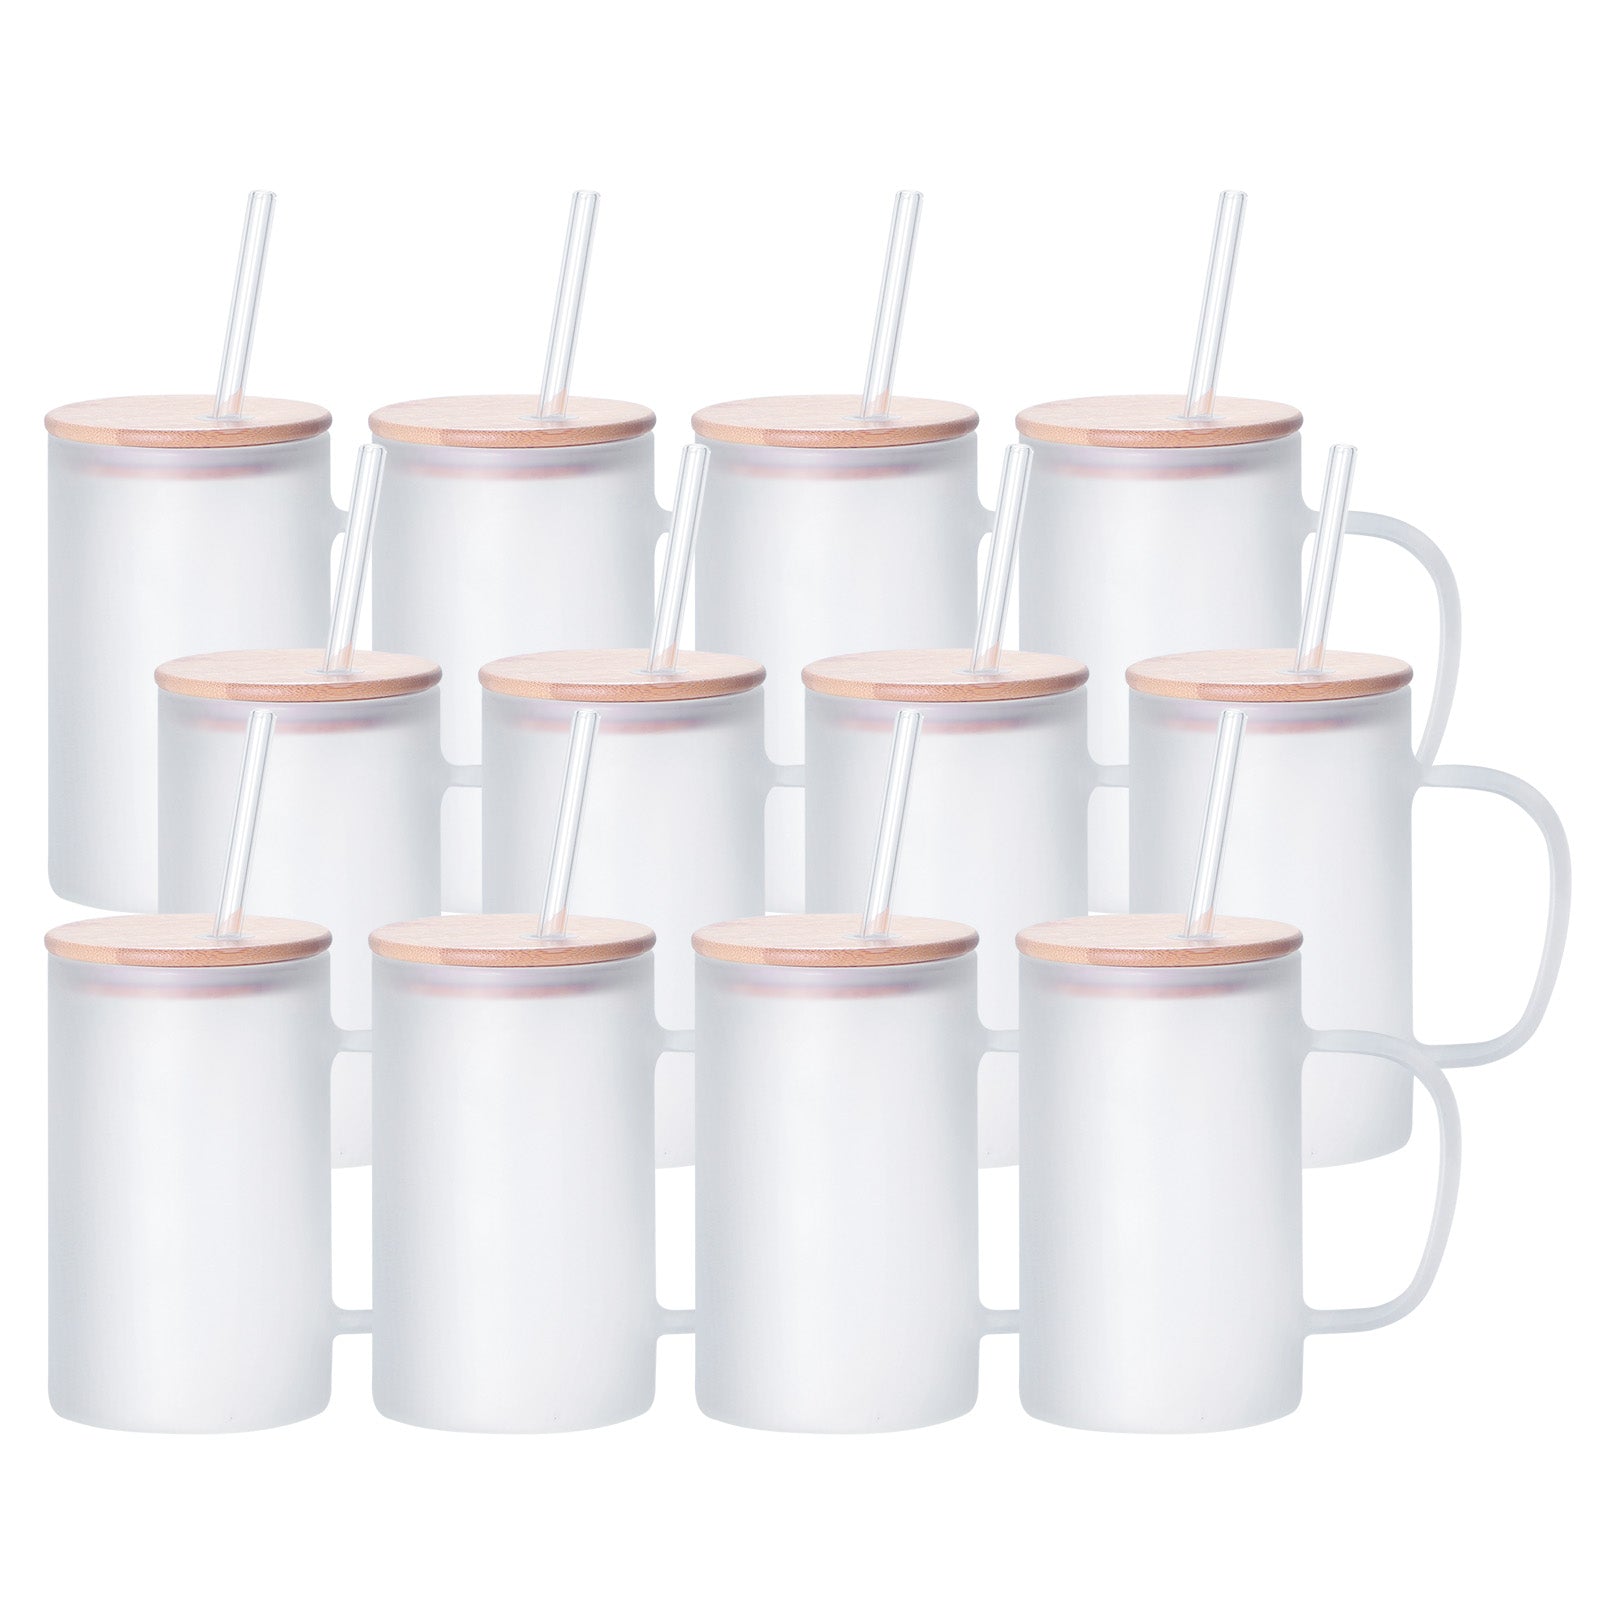 PYD Life 8 Pack Sublimation 40 oz Tumblers with Handle Blanks Bulk White Coffee Travel Mugs Cups with Lid and Stainless Straw for Tumbler Heat Press